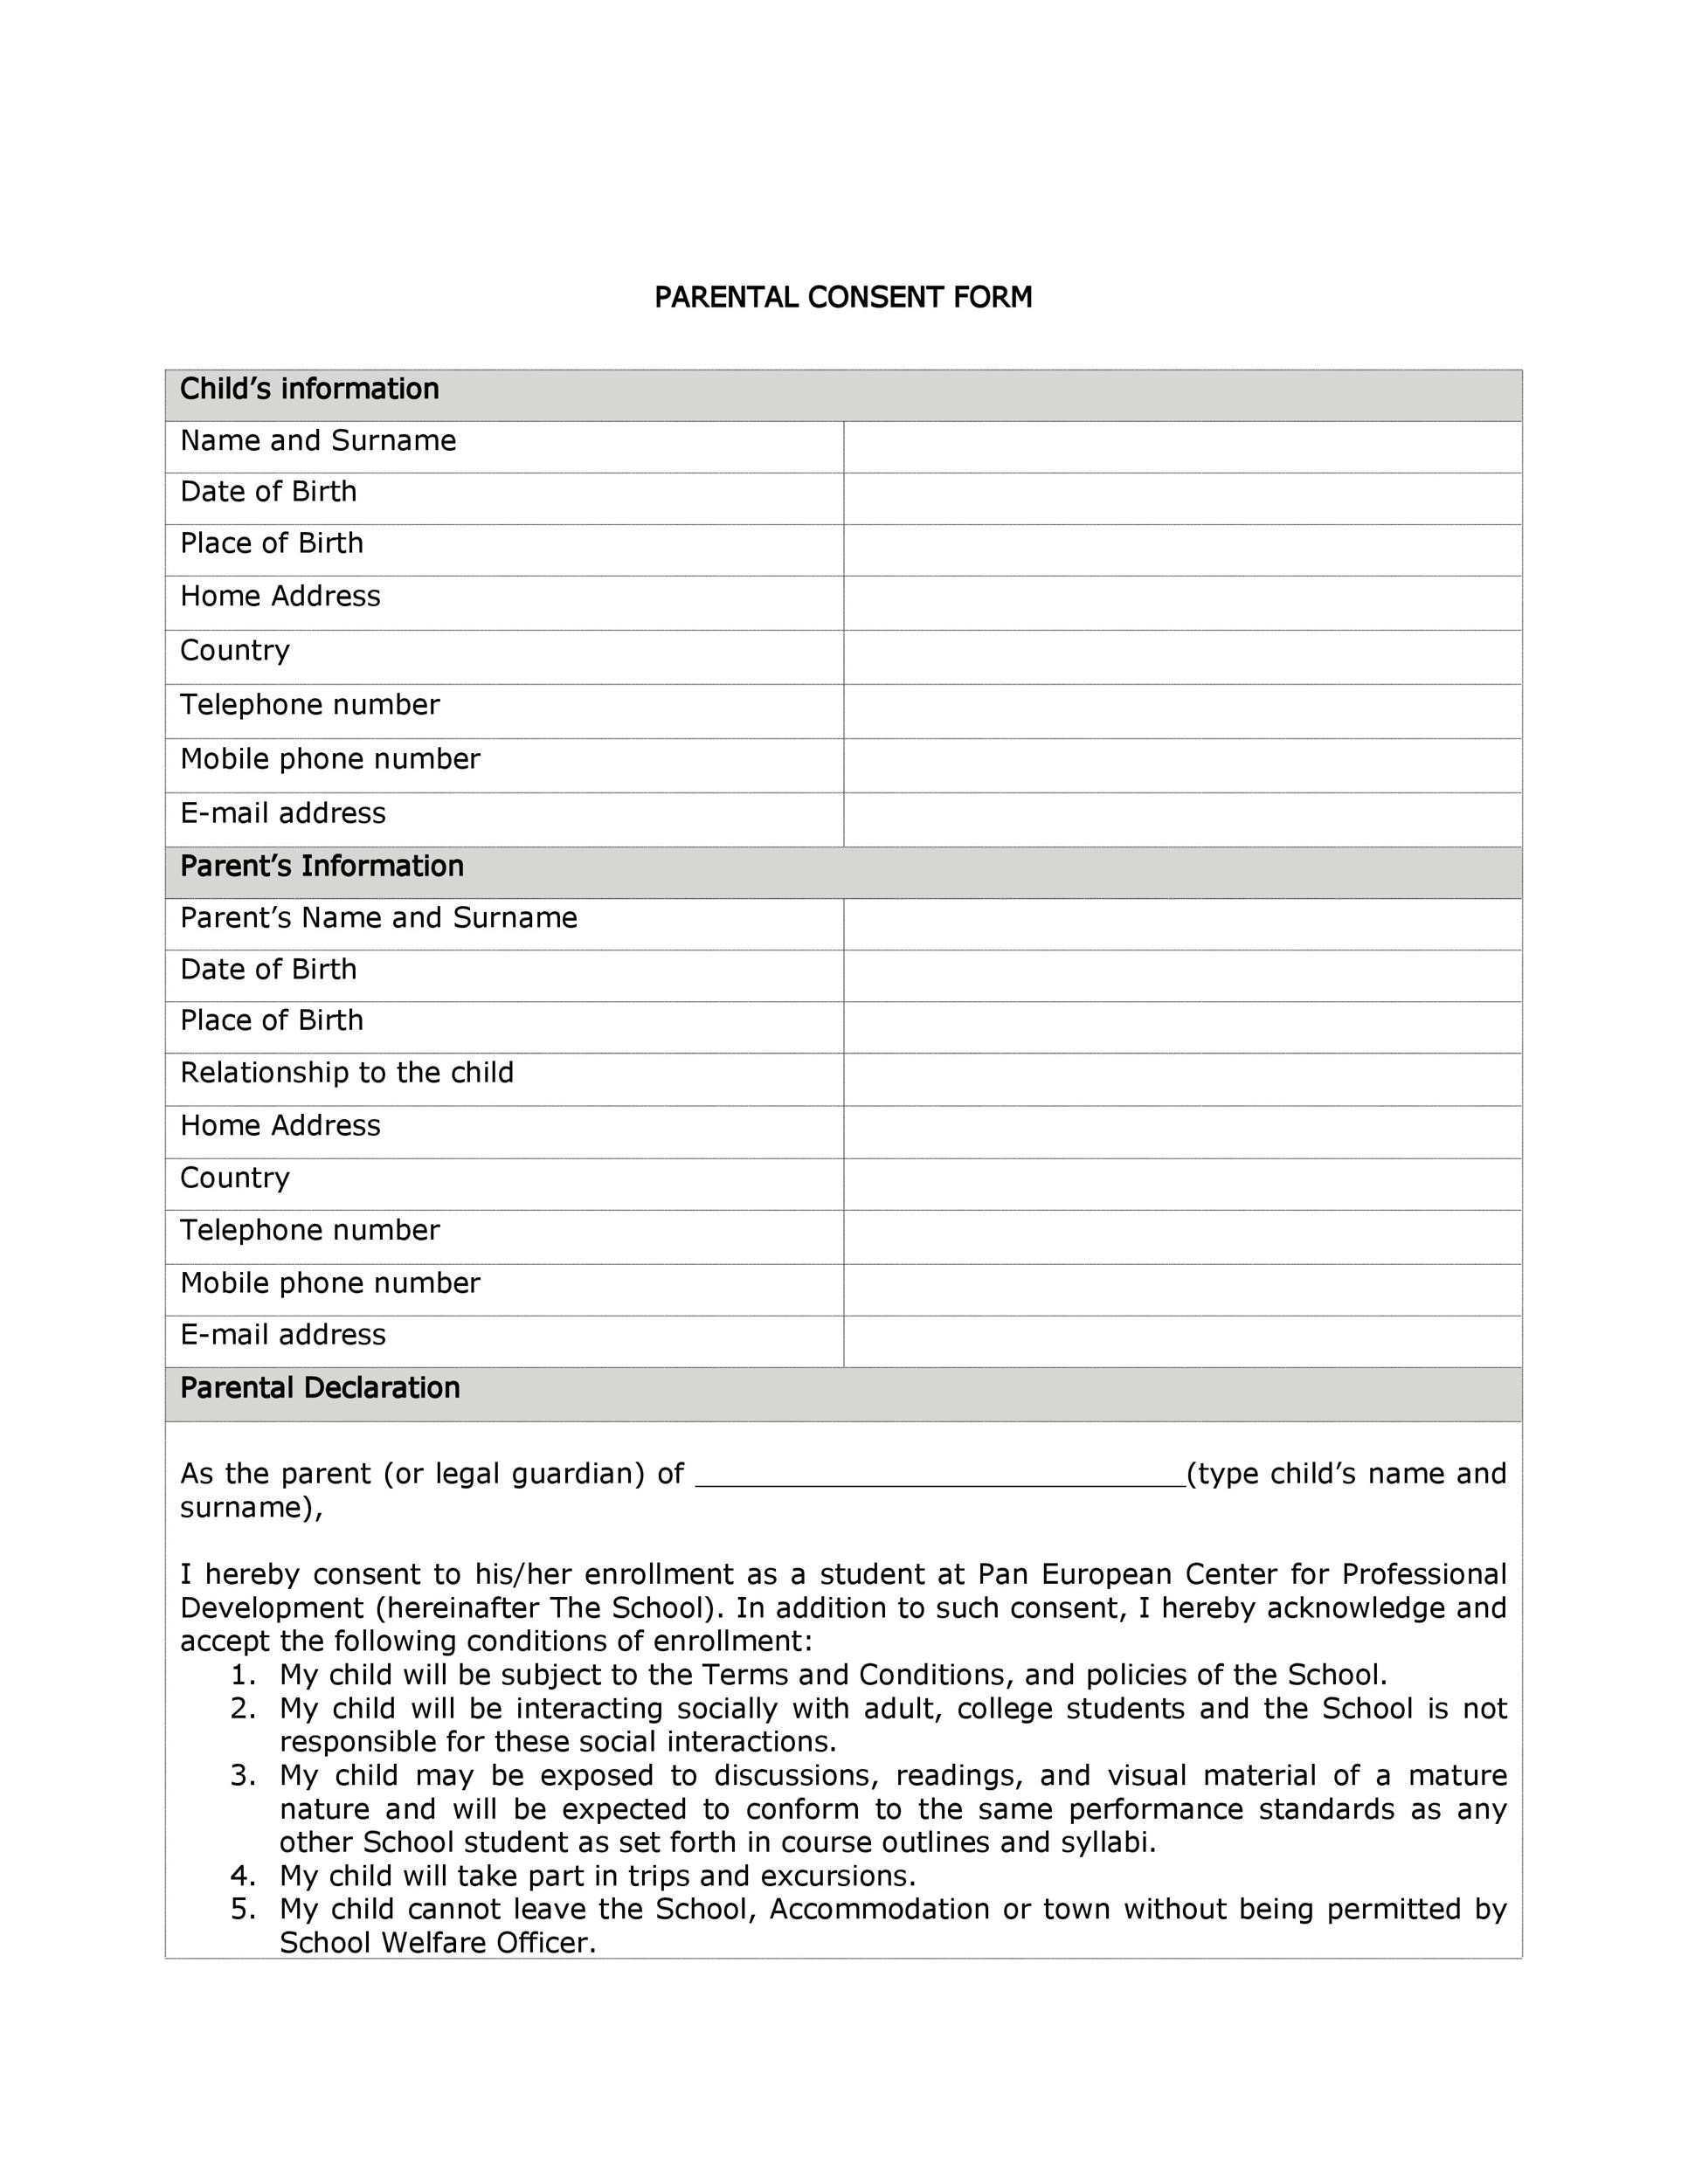 Free parental consent form template 12